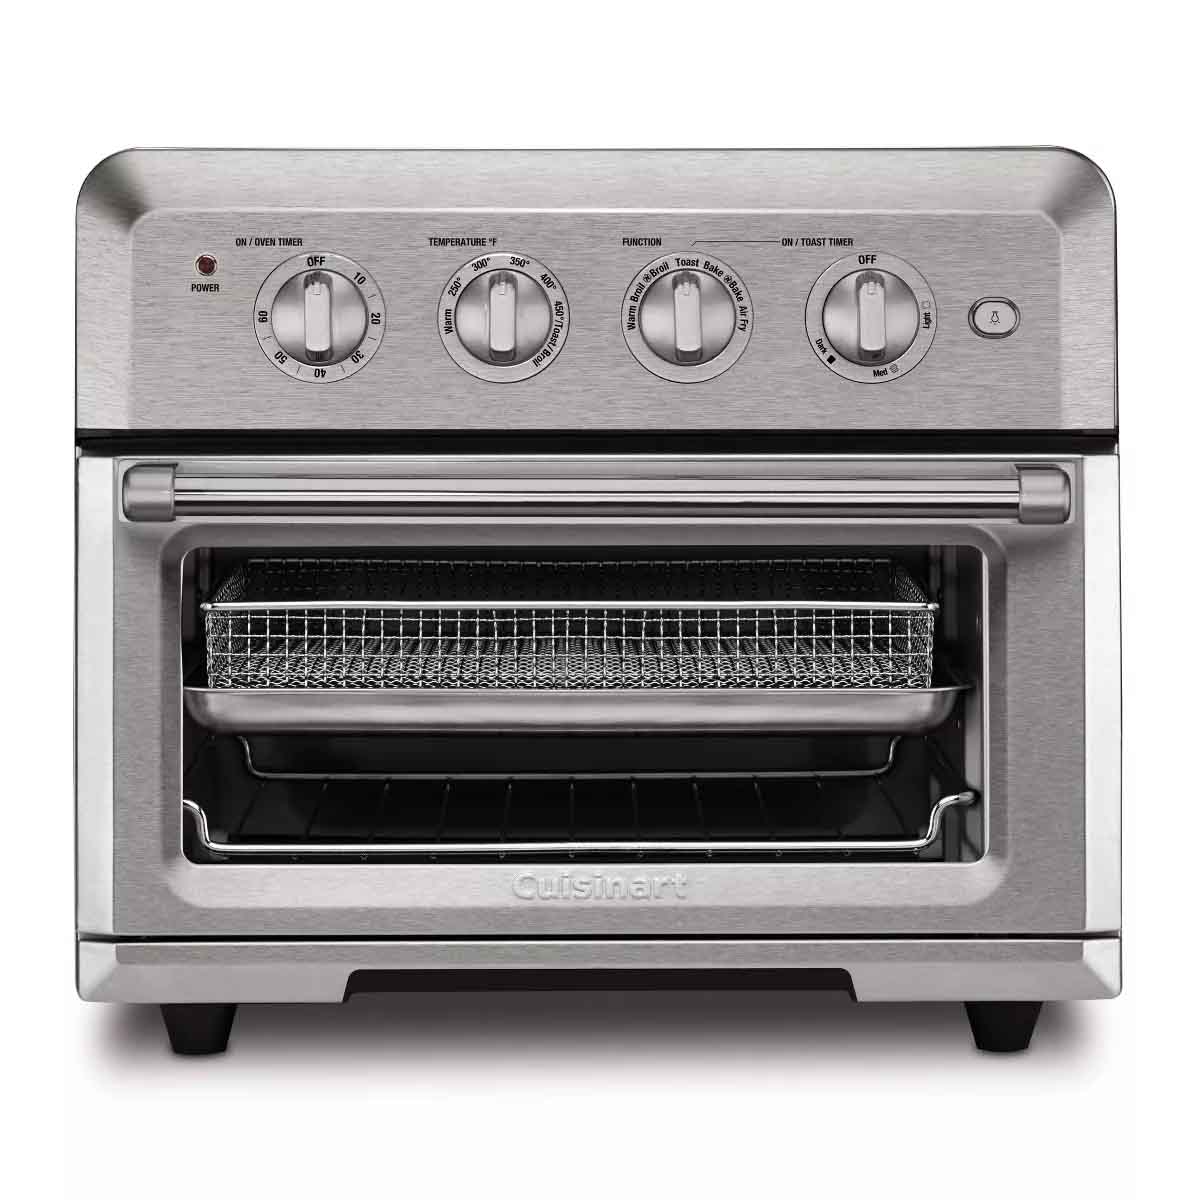 silver stainless steel Cuisinart Air Fryer Toaster Oven with oven rack